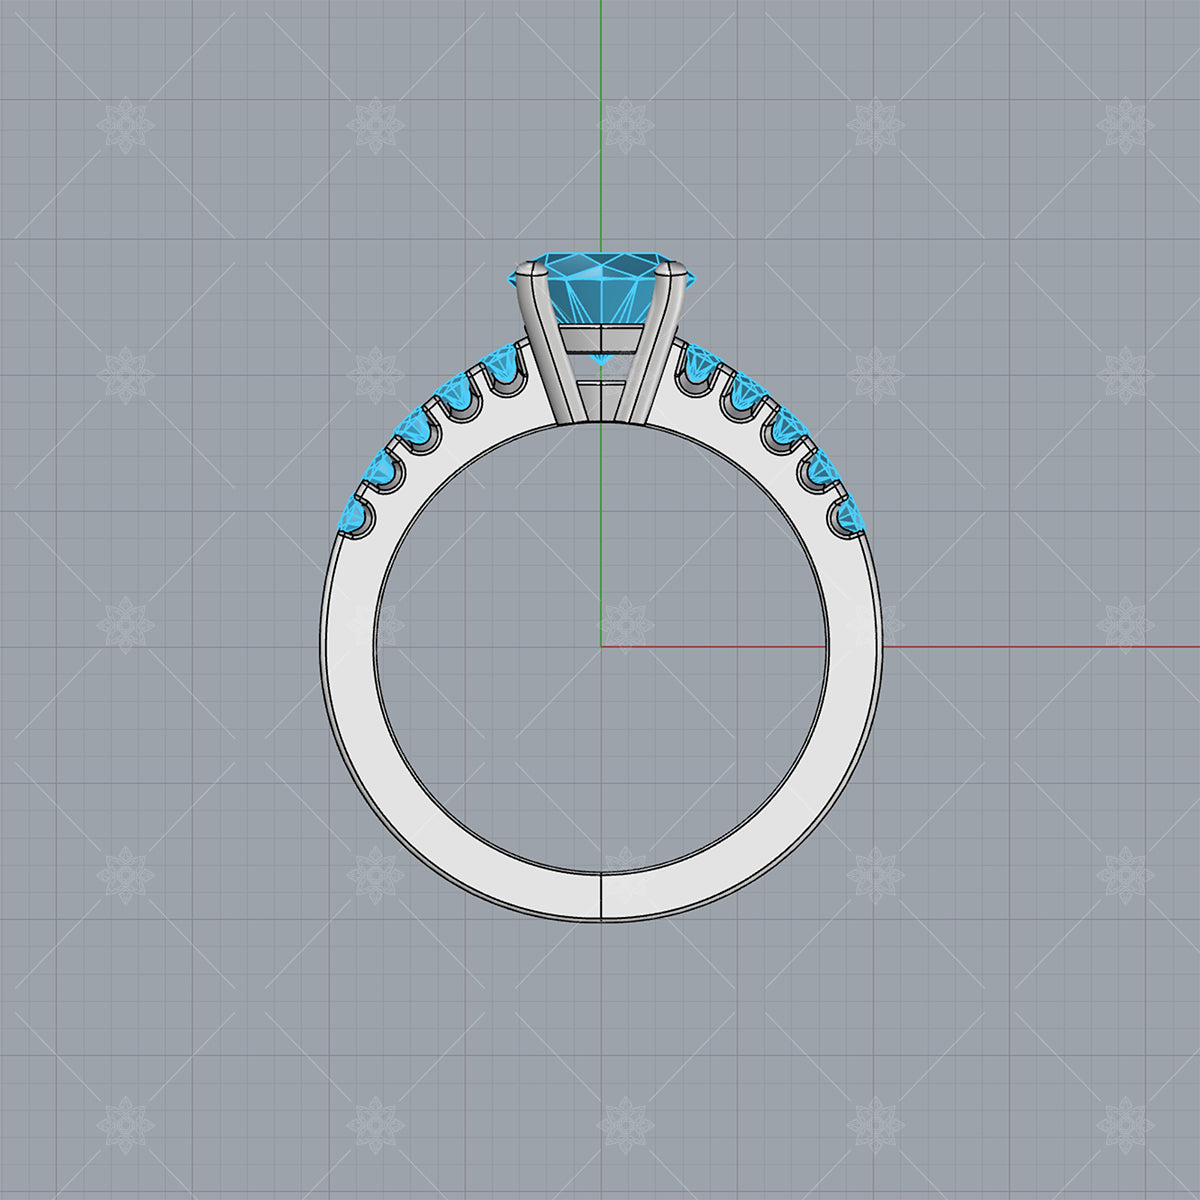 9 Ways to Prepare your 3D CAD models for Jewellery Rendering — Lionsorbet